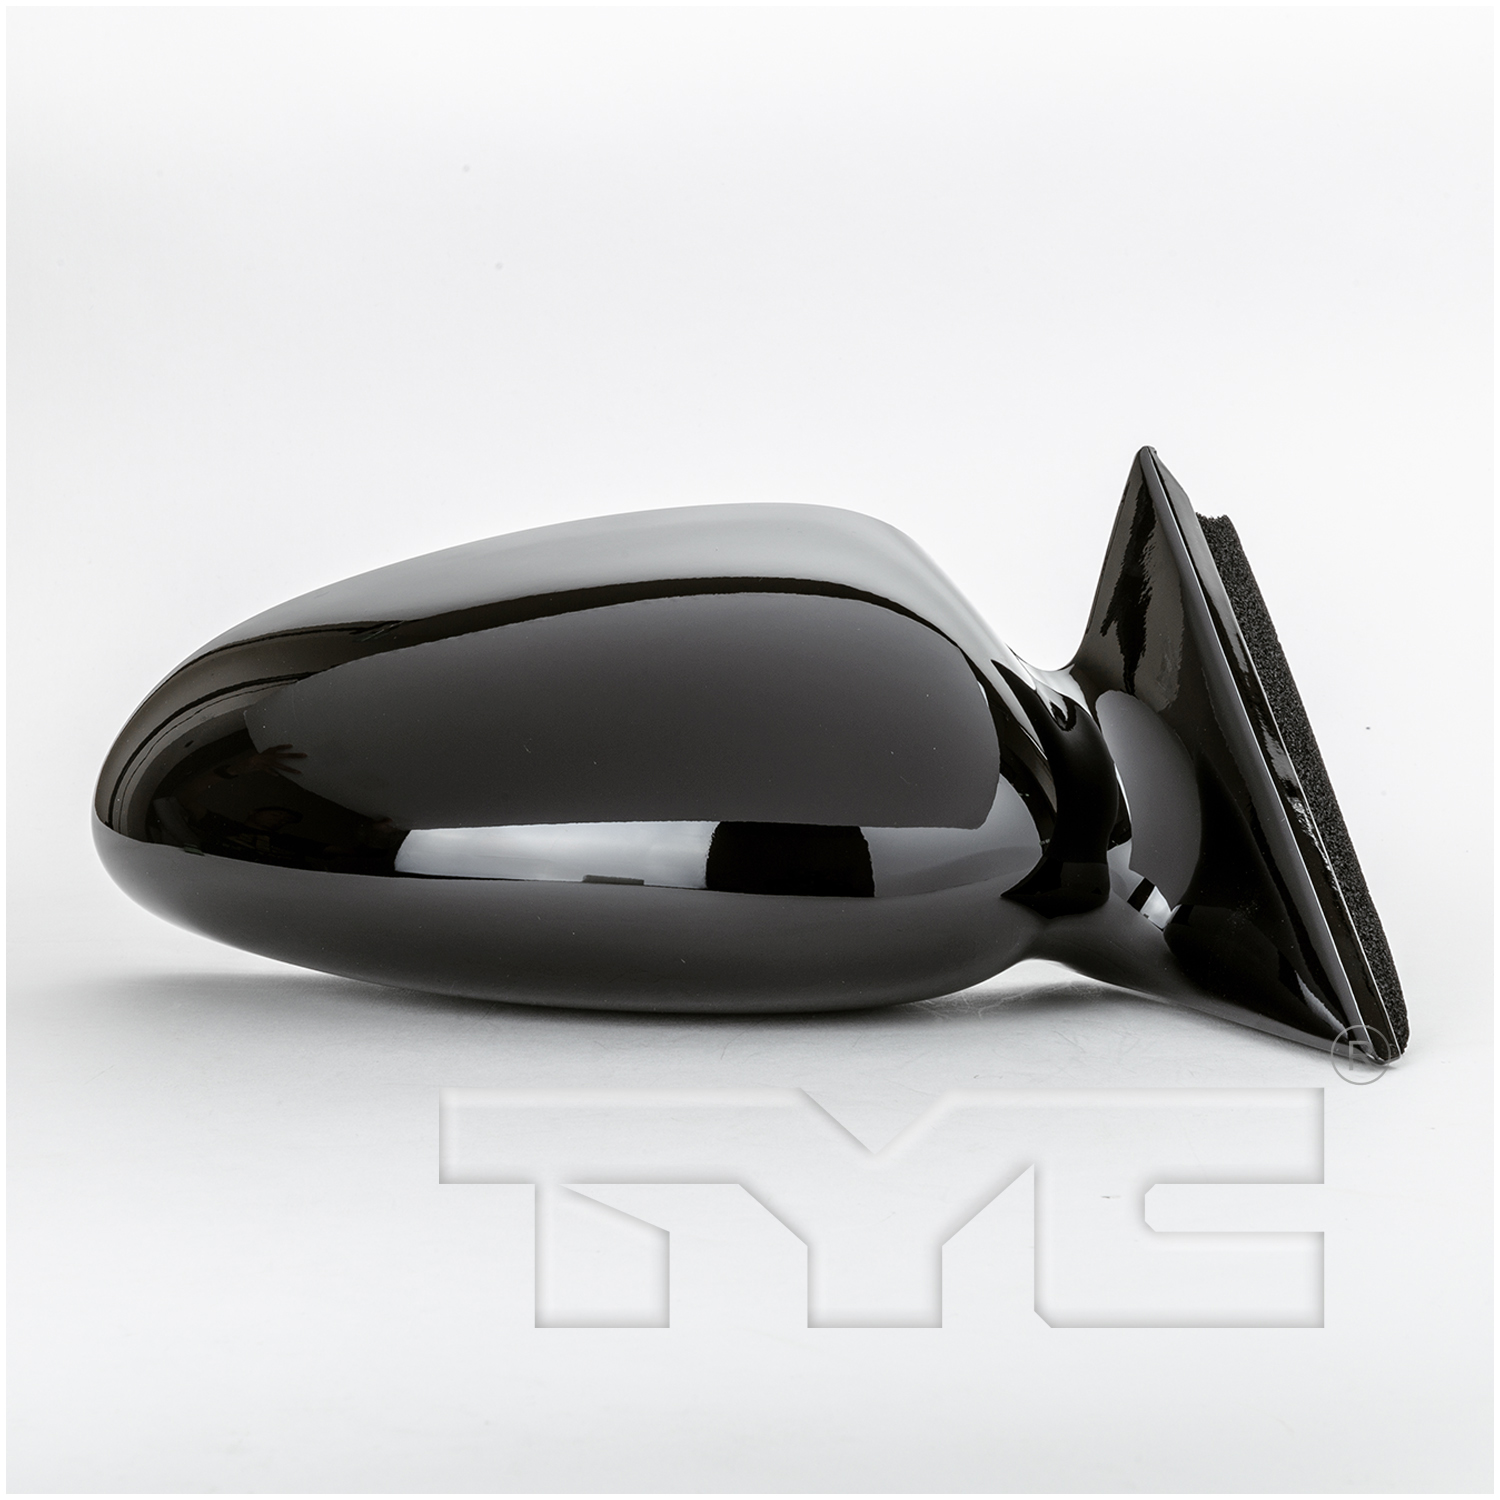 Aftermarket MIRRORS for CHEVROLET - MONTE CARLO, MONTE CARLO,00-05,RT Mirror outside rear view